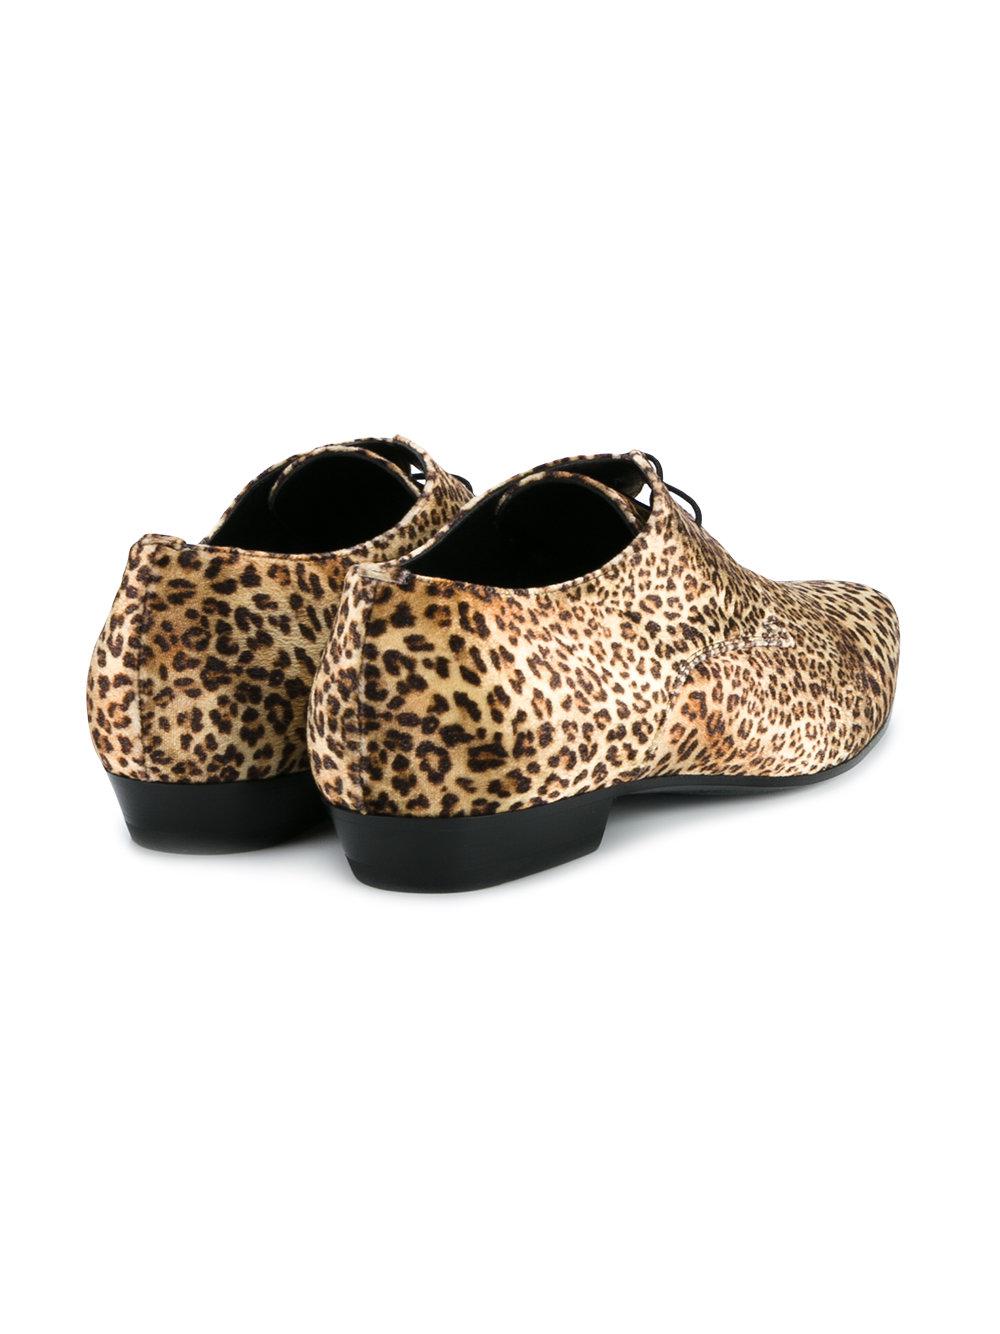 36 Best Brown zebra print shoes Combine with Best Outfit